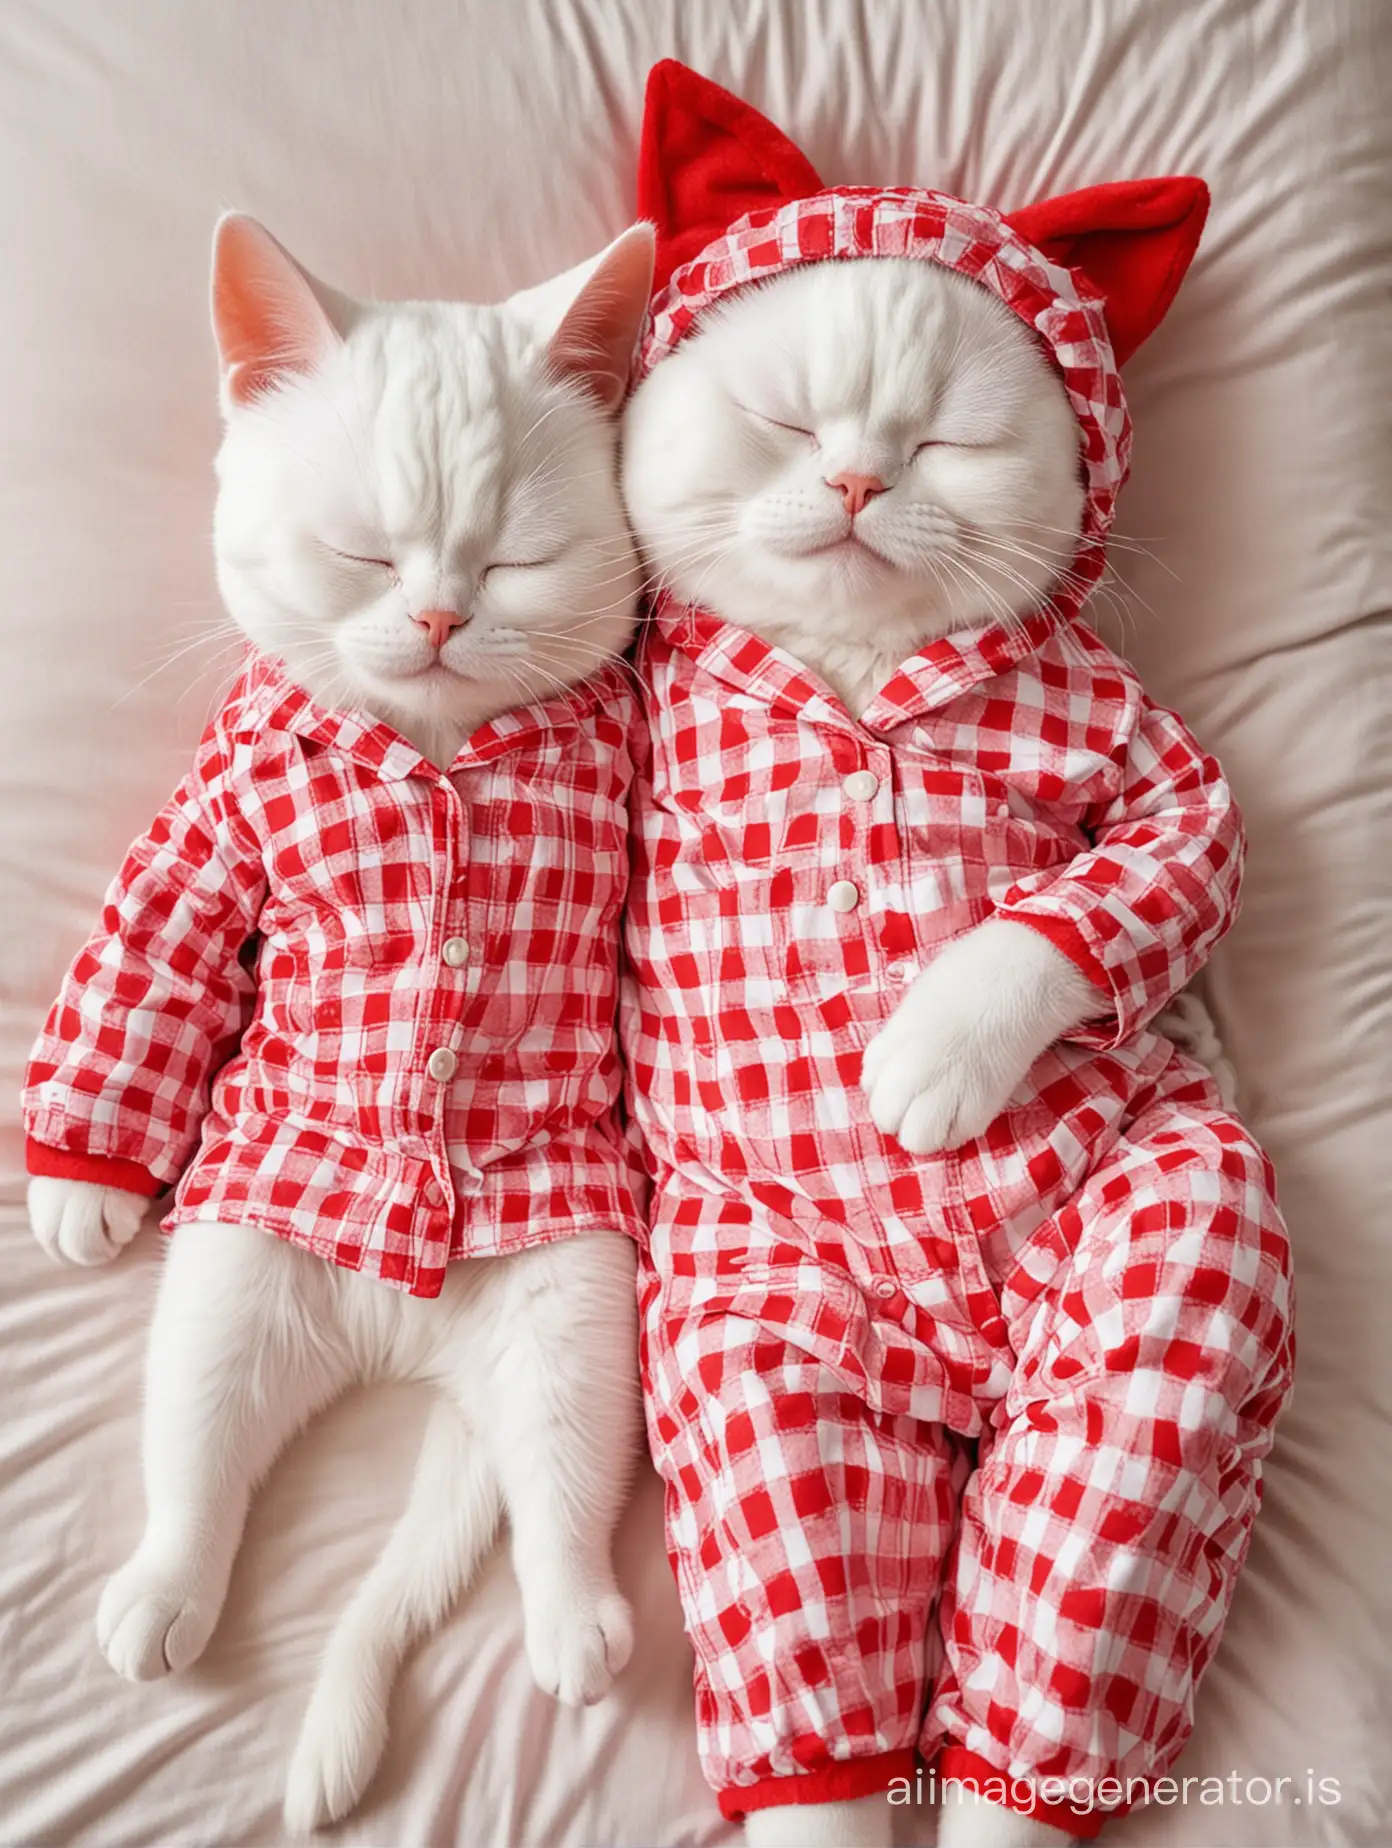 A crazy red anthropomorphic cat in pajamas shakes a sleeping white anthropomorphic cat